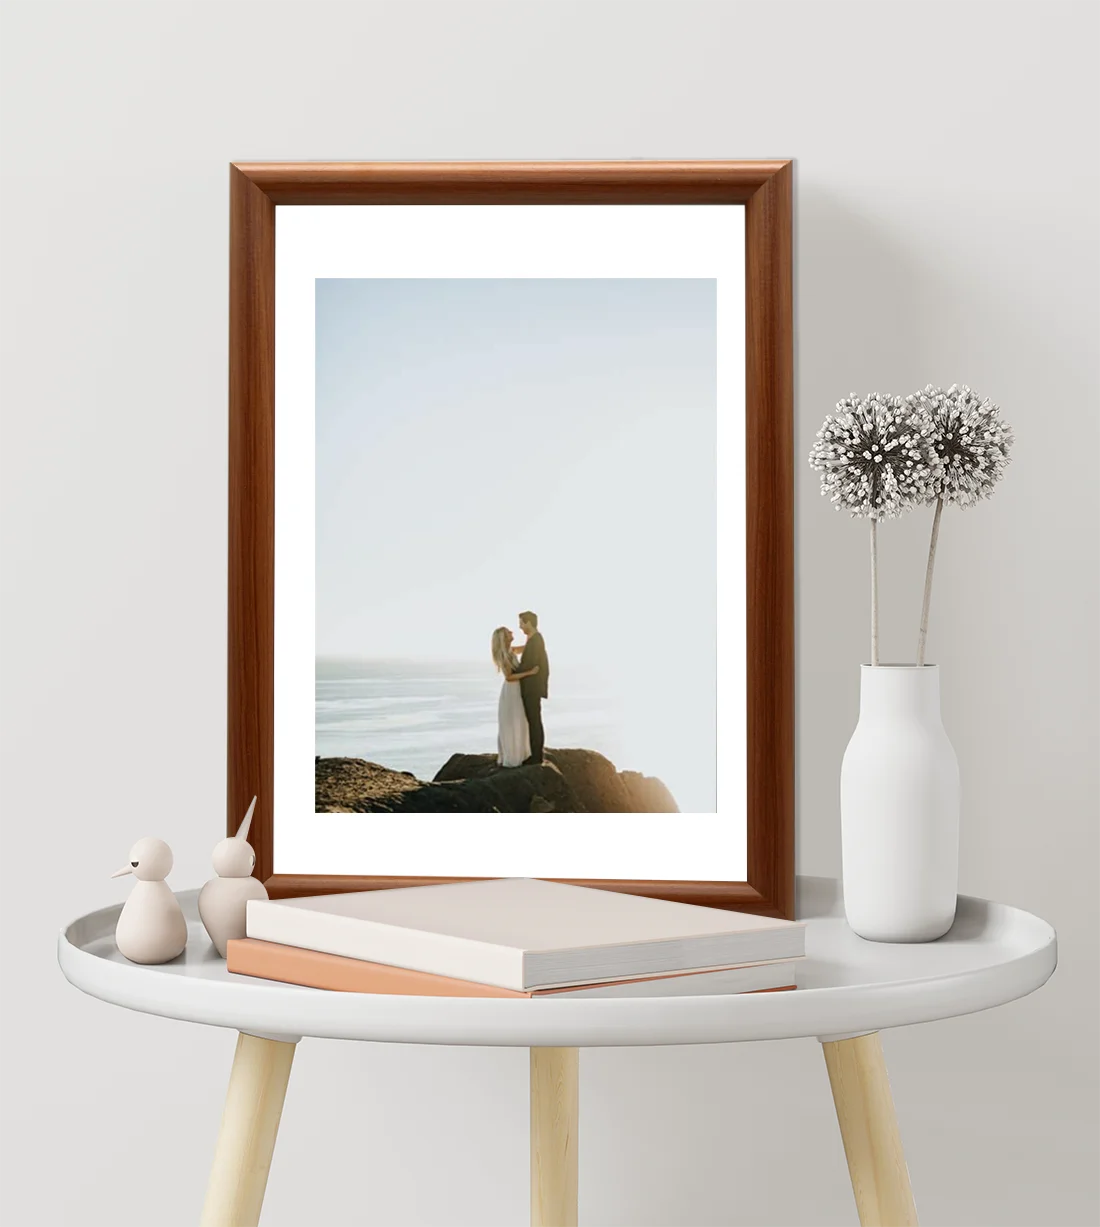 Chely Intermarket, MOD-351 photo frames with photo paspartu included, all  measures with glass glass and hook to hang. Made of MDF wood